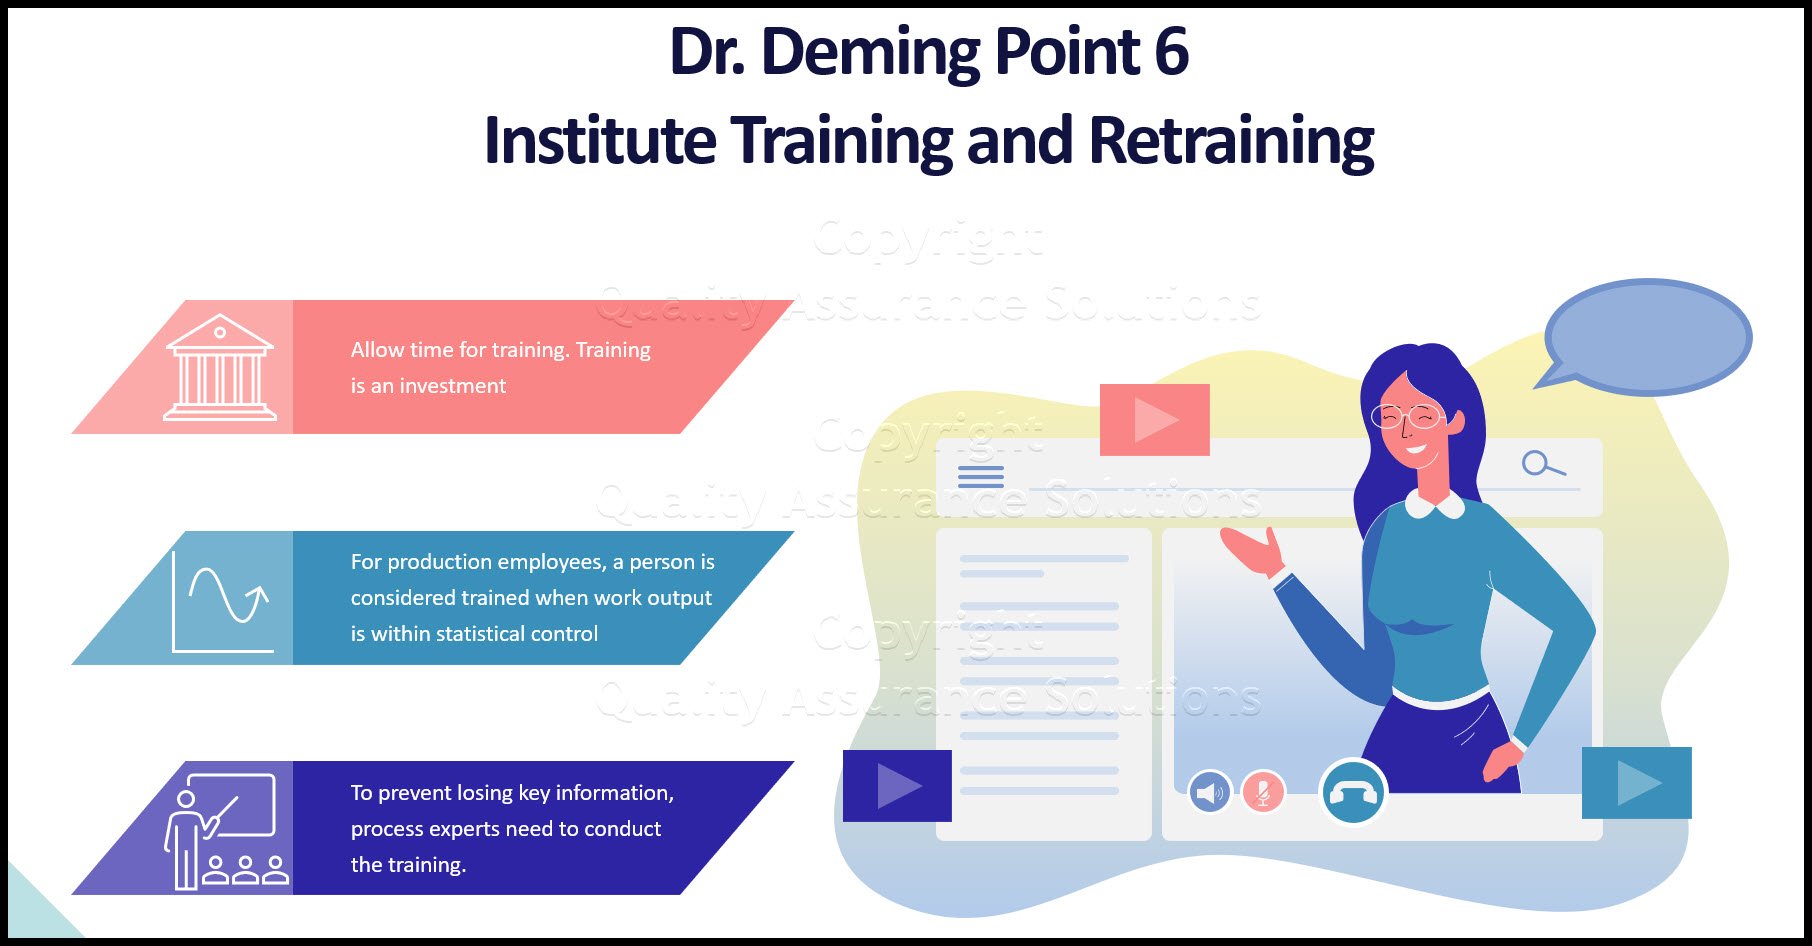 Learn Dr. Deming point 6 thoughts on training